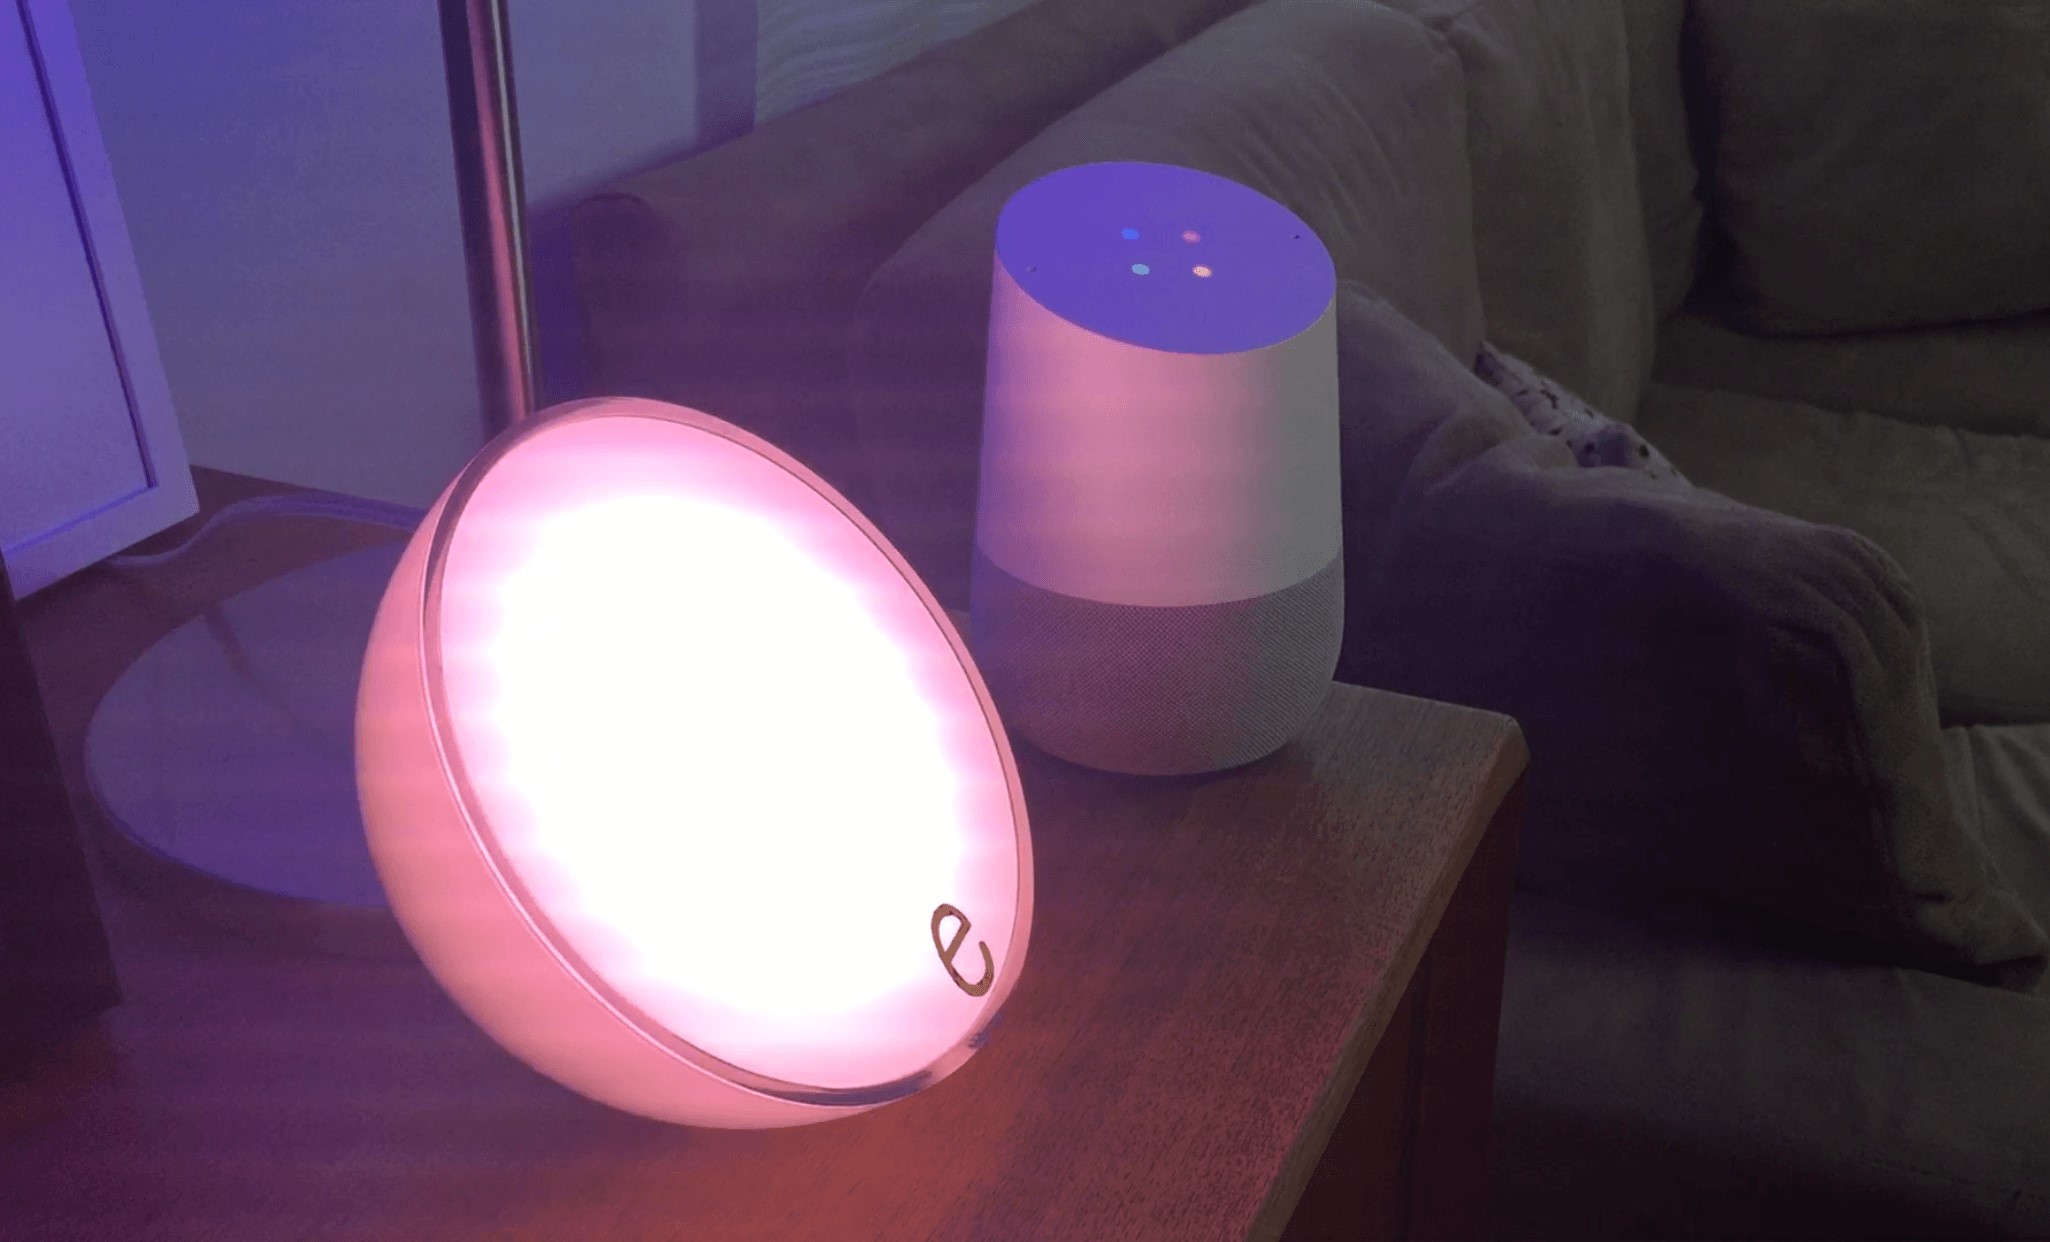 How To Add Philips Hue To Google Home